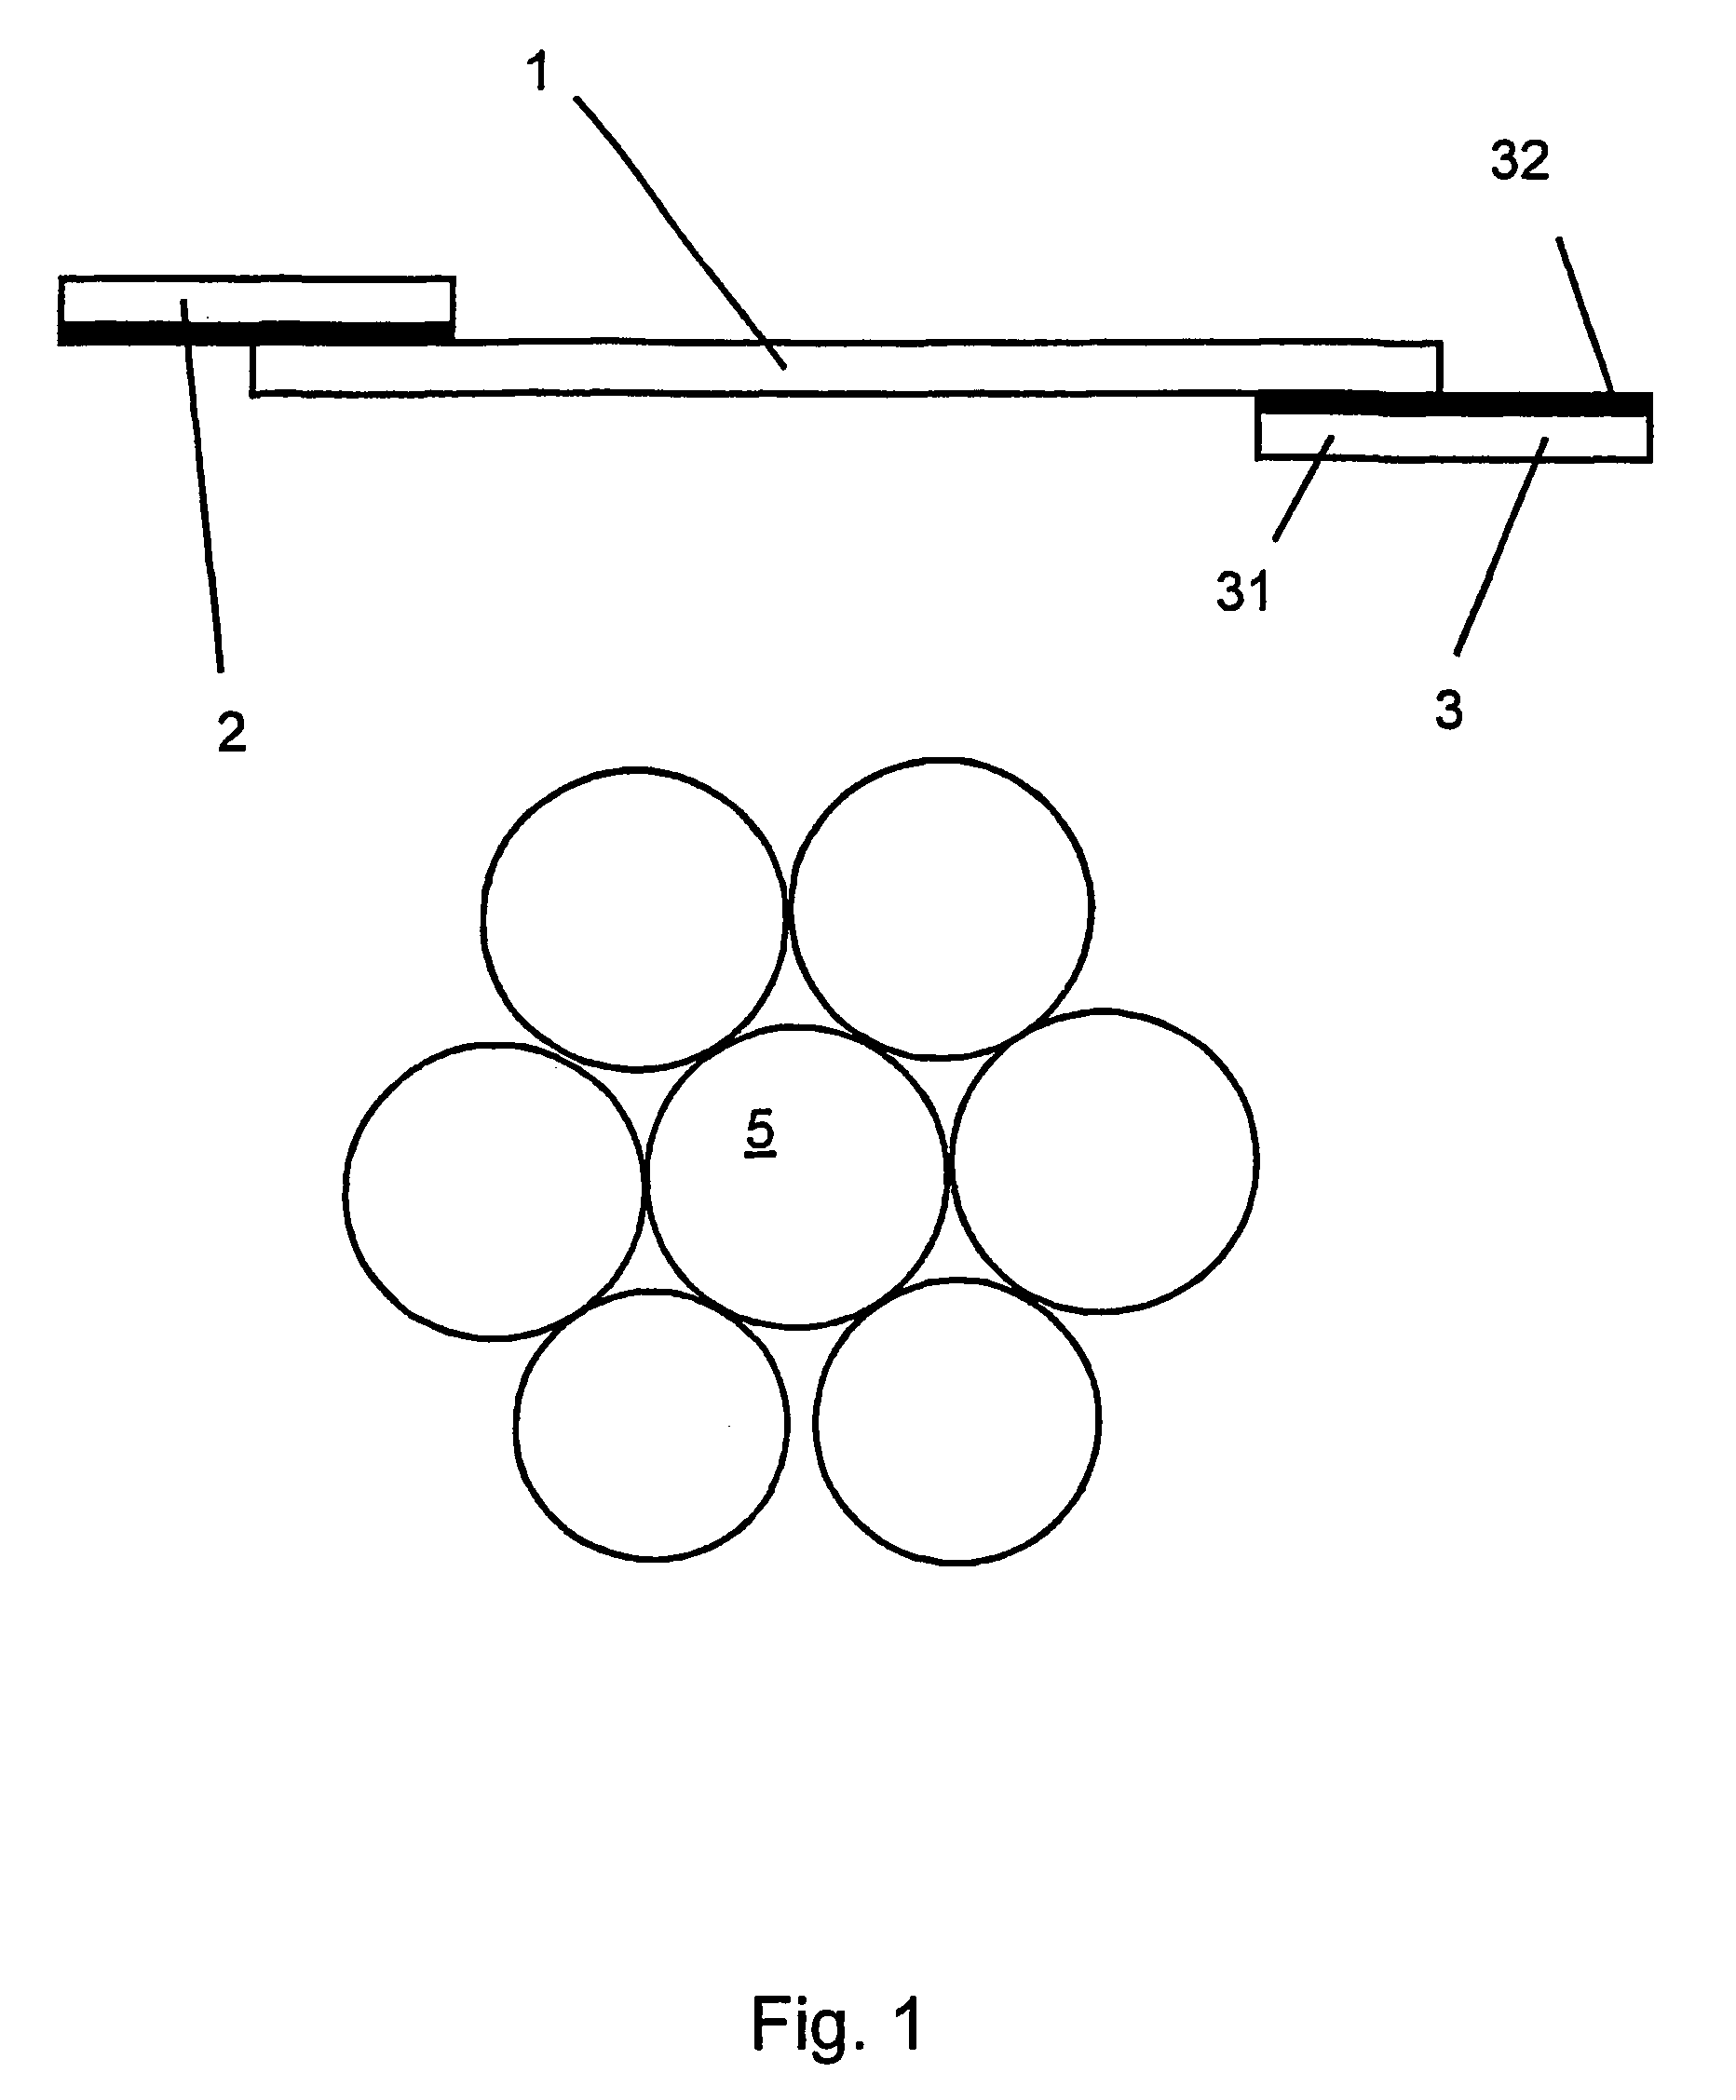 Method for providing longitudinally extended articles, such as cable assemblies, with a sheathing